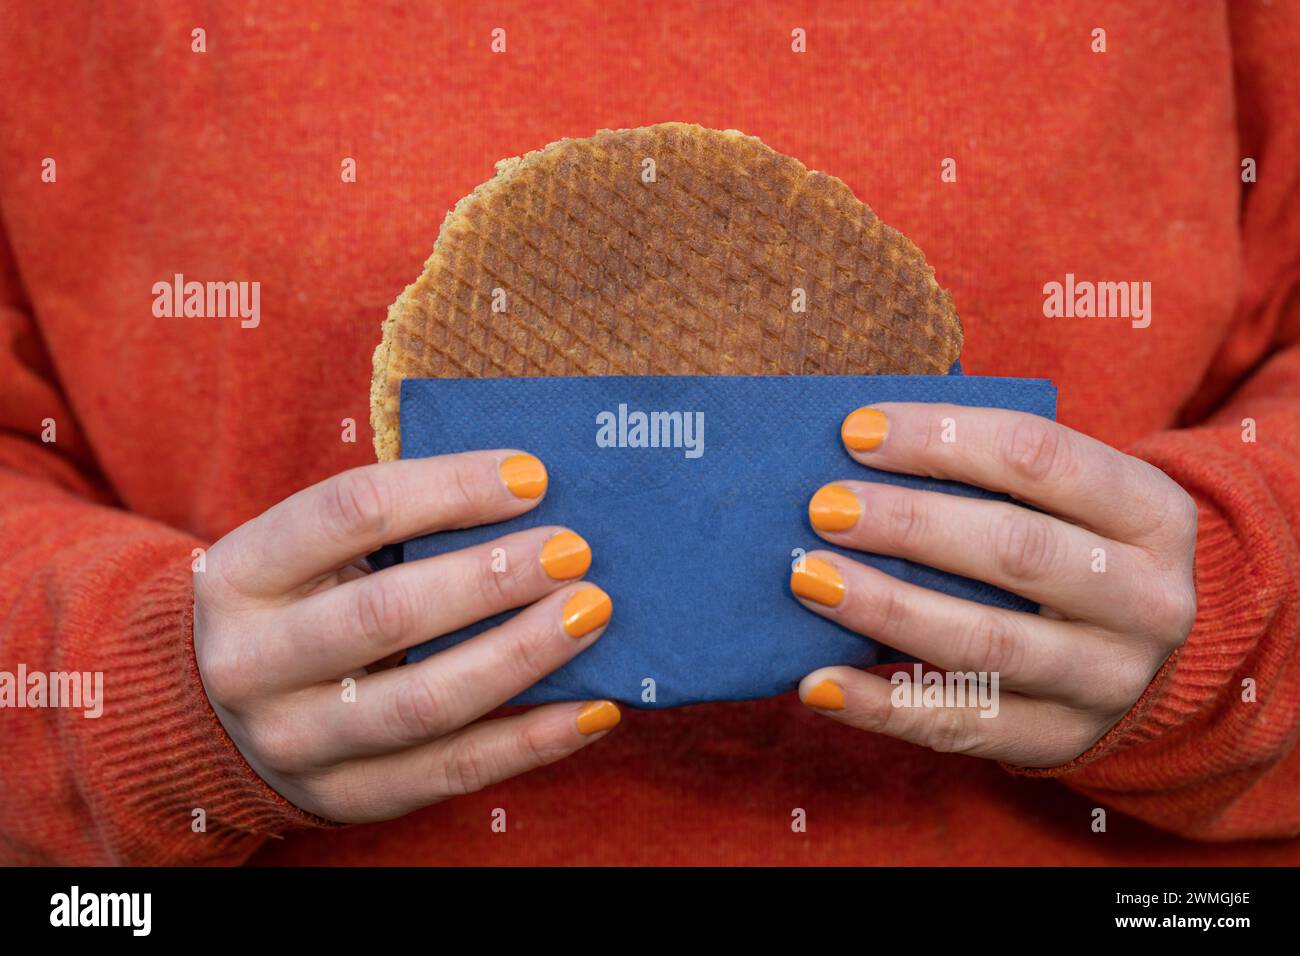 Woman holds traditional dutch Stroopwafel, a round waffle cookie treat popular in The Netherlands Stock Photo